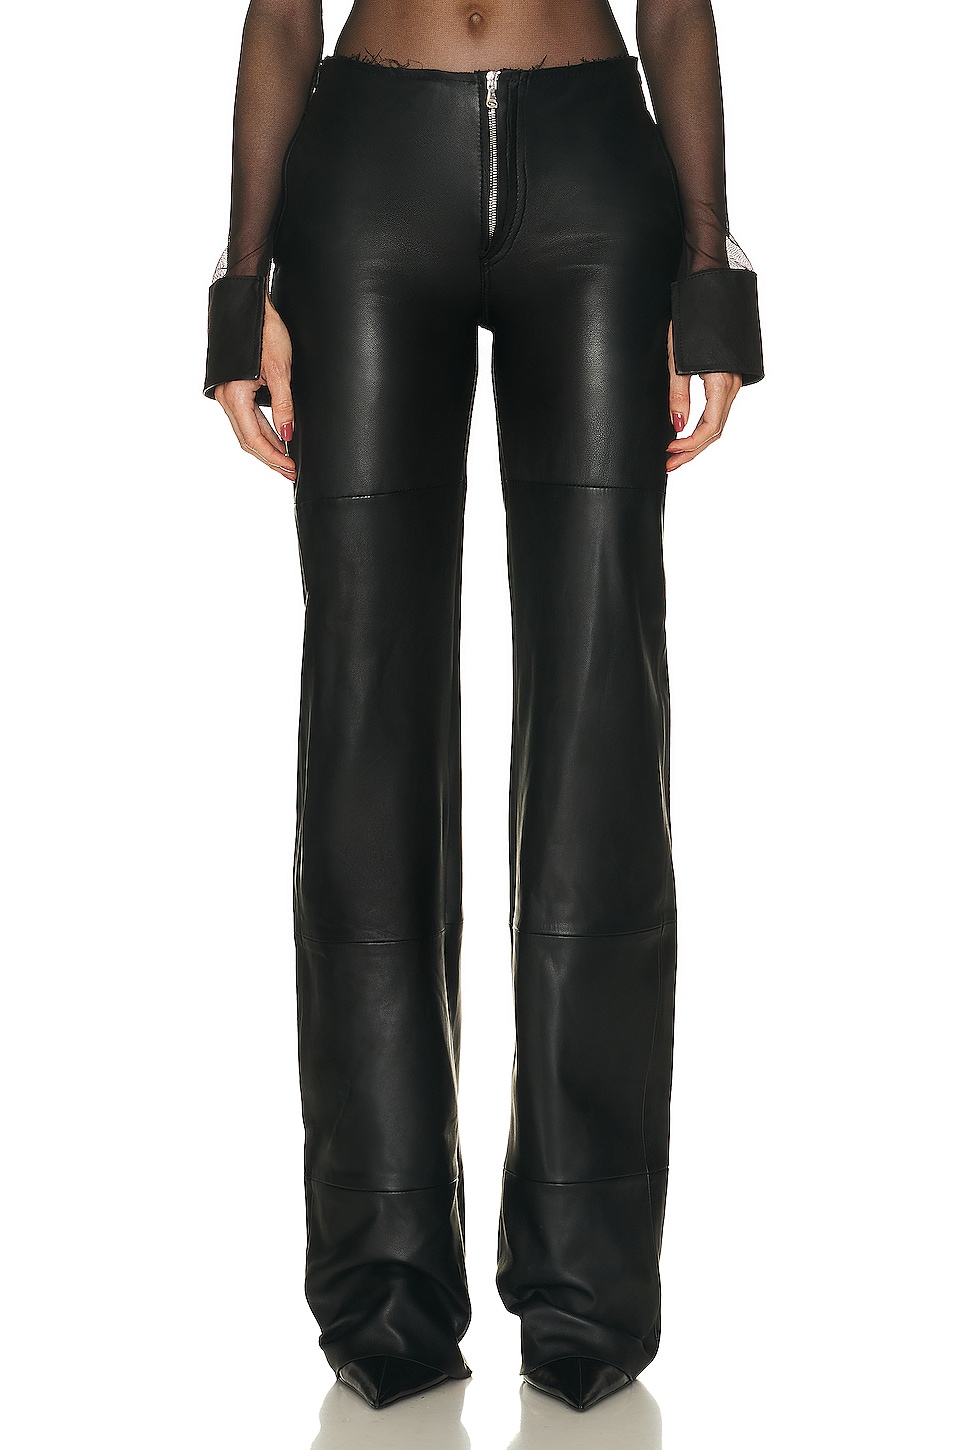 Image 1 of SAMI MIRO VINTAGE for FWRD Undone Waist Leather Pant in Black